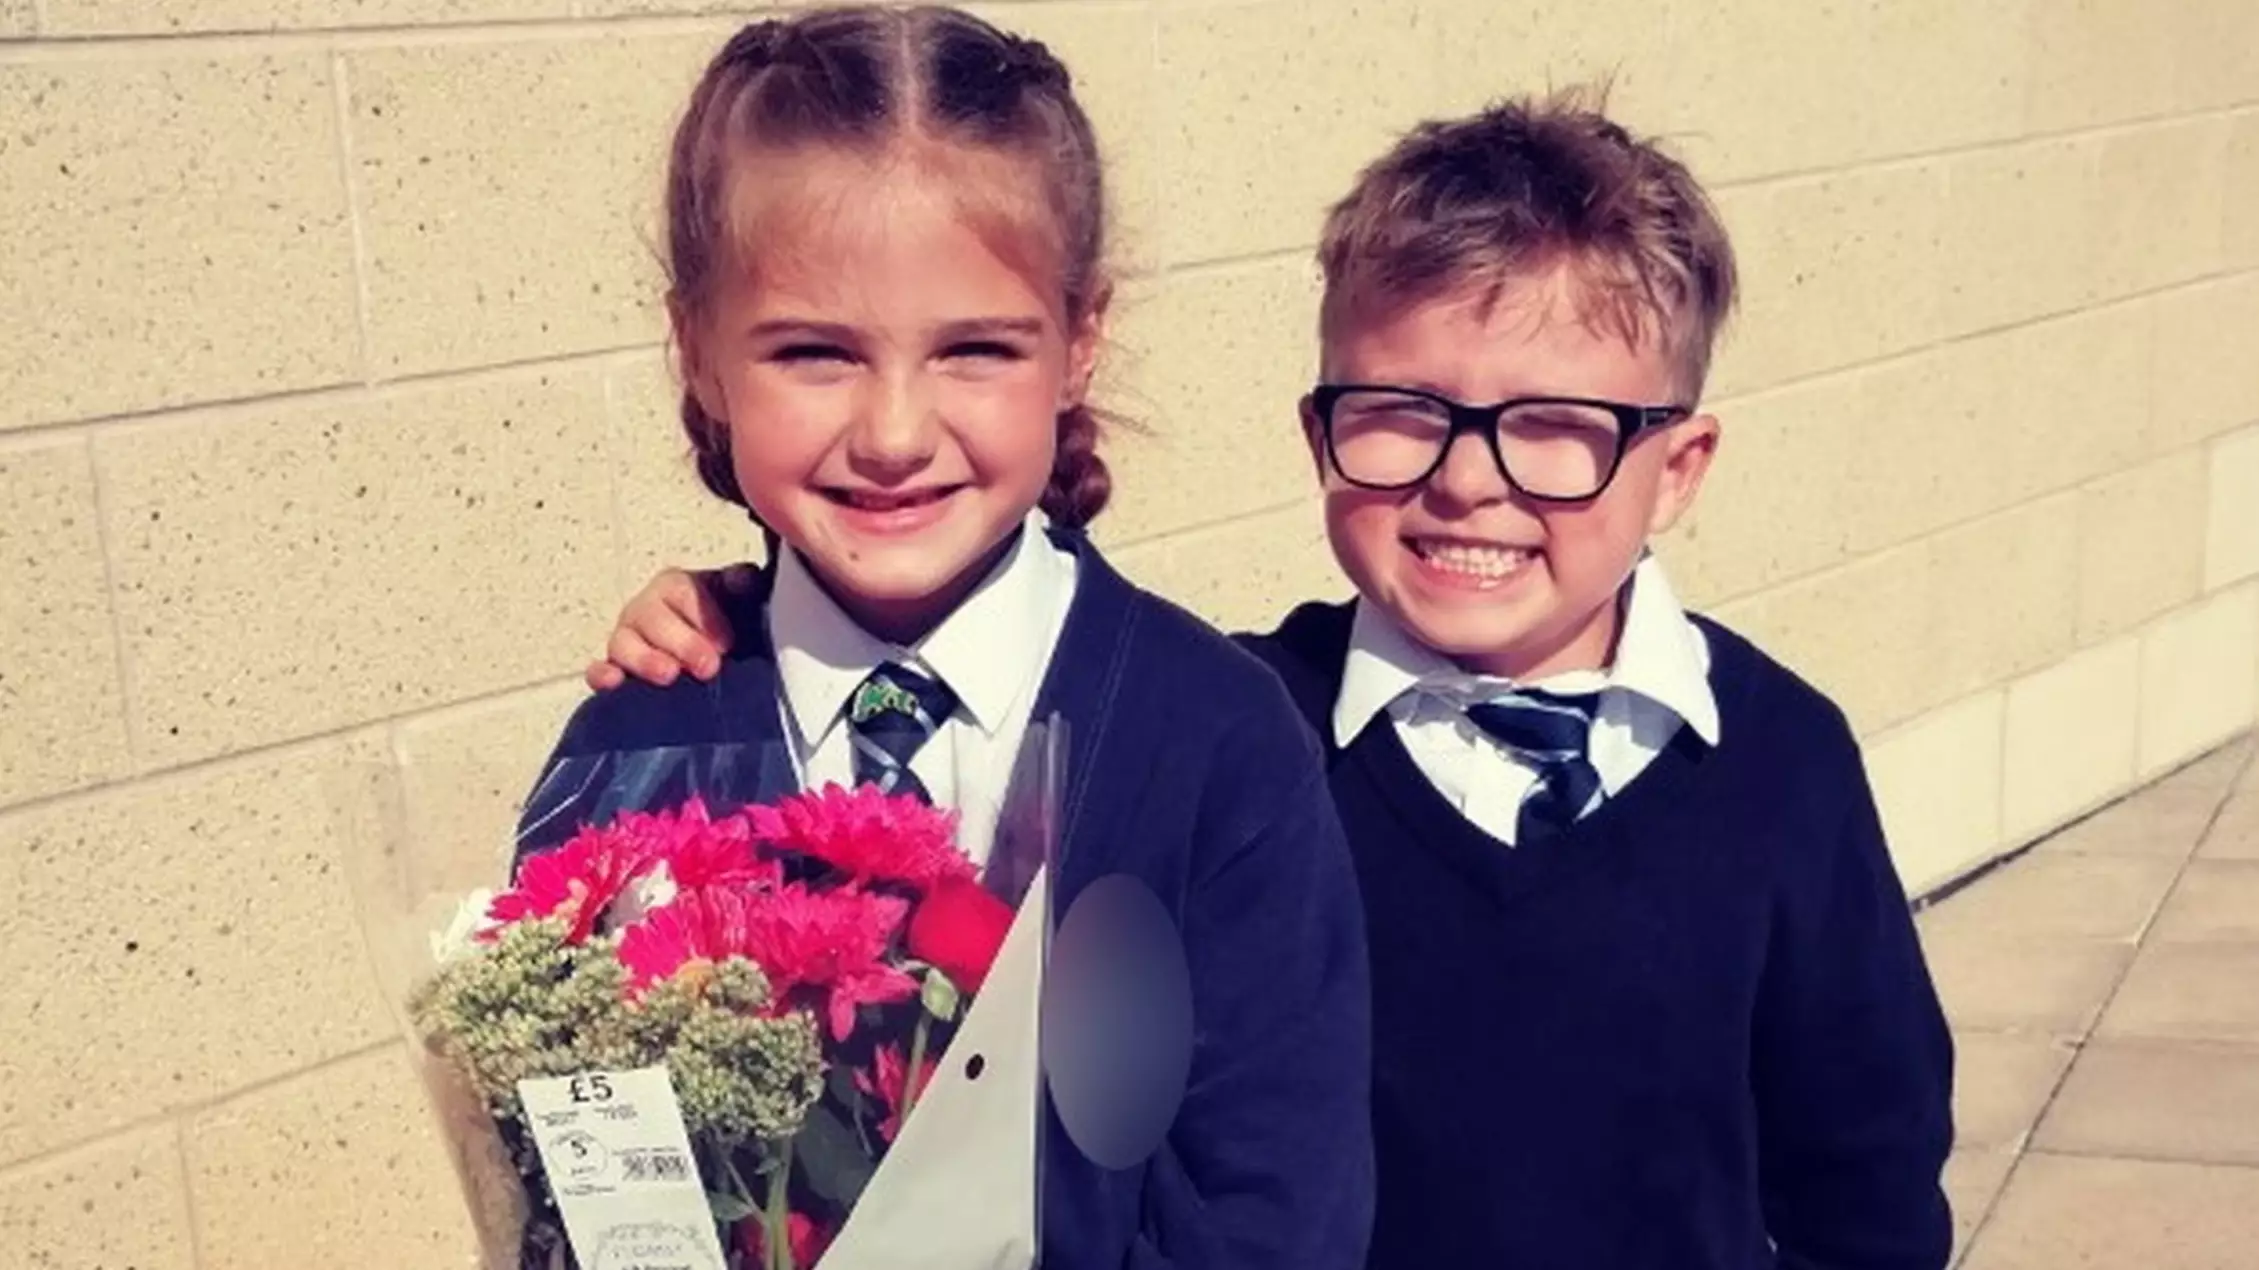 Schoolboy, 7, Waits Outside Gates With Flowers To 'Win Back' Girlfriend 